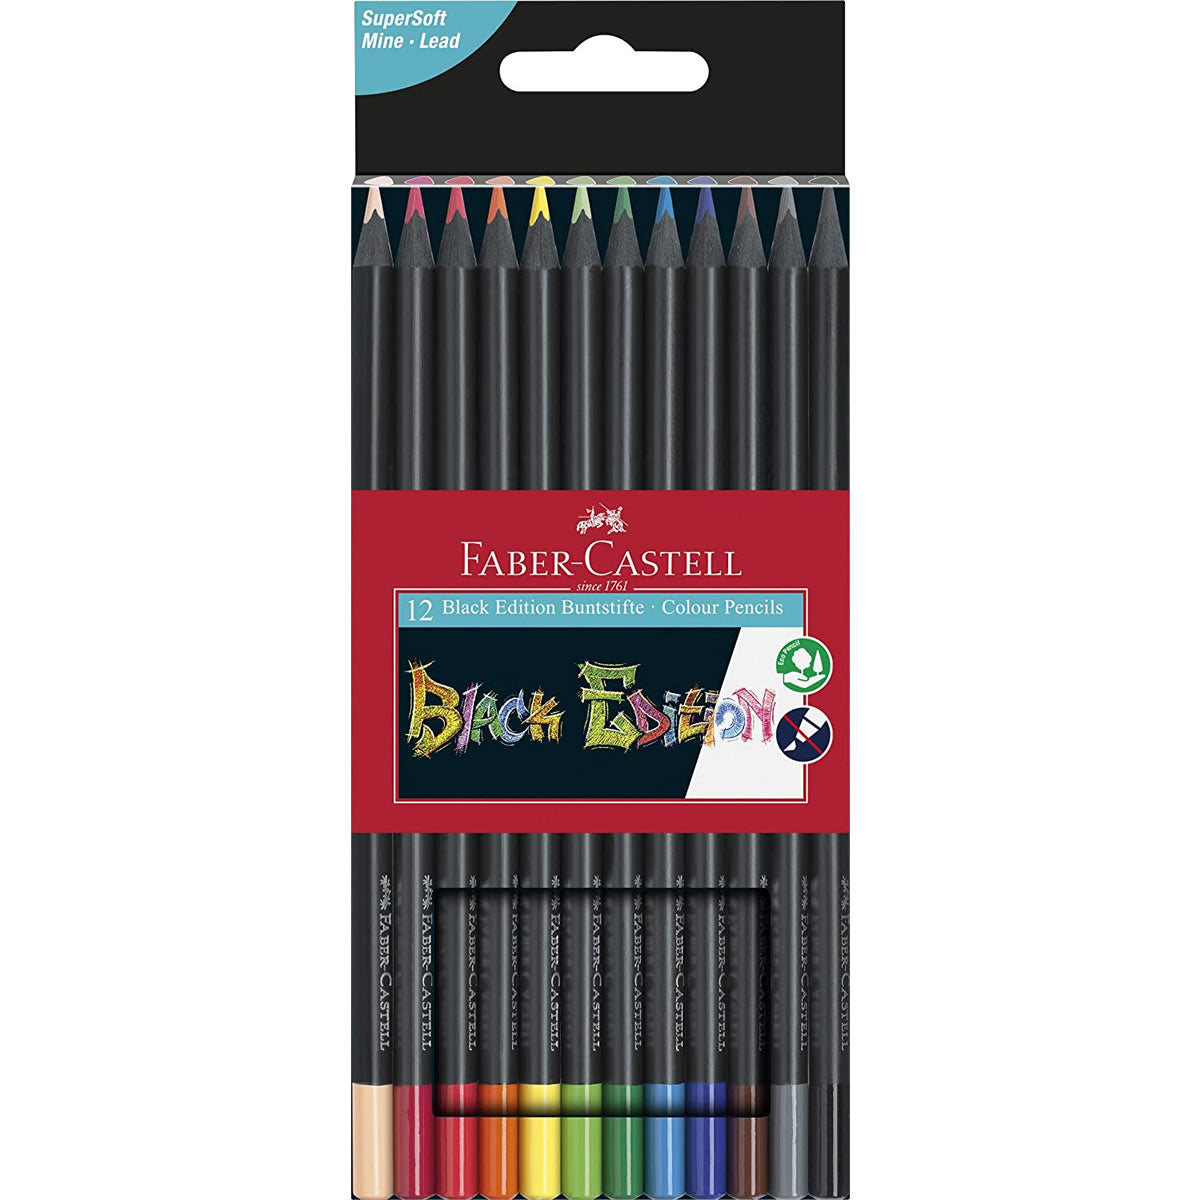 Faber-Castell Black Edition Colouring Pencils - Pack of 12